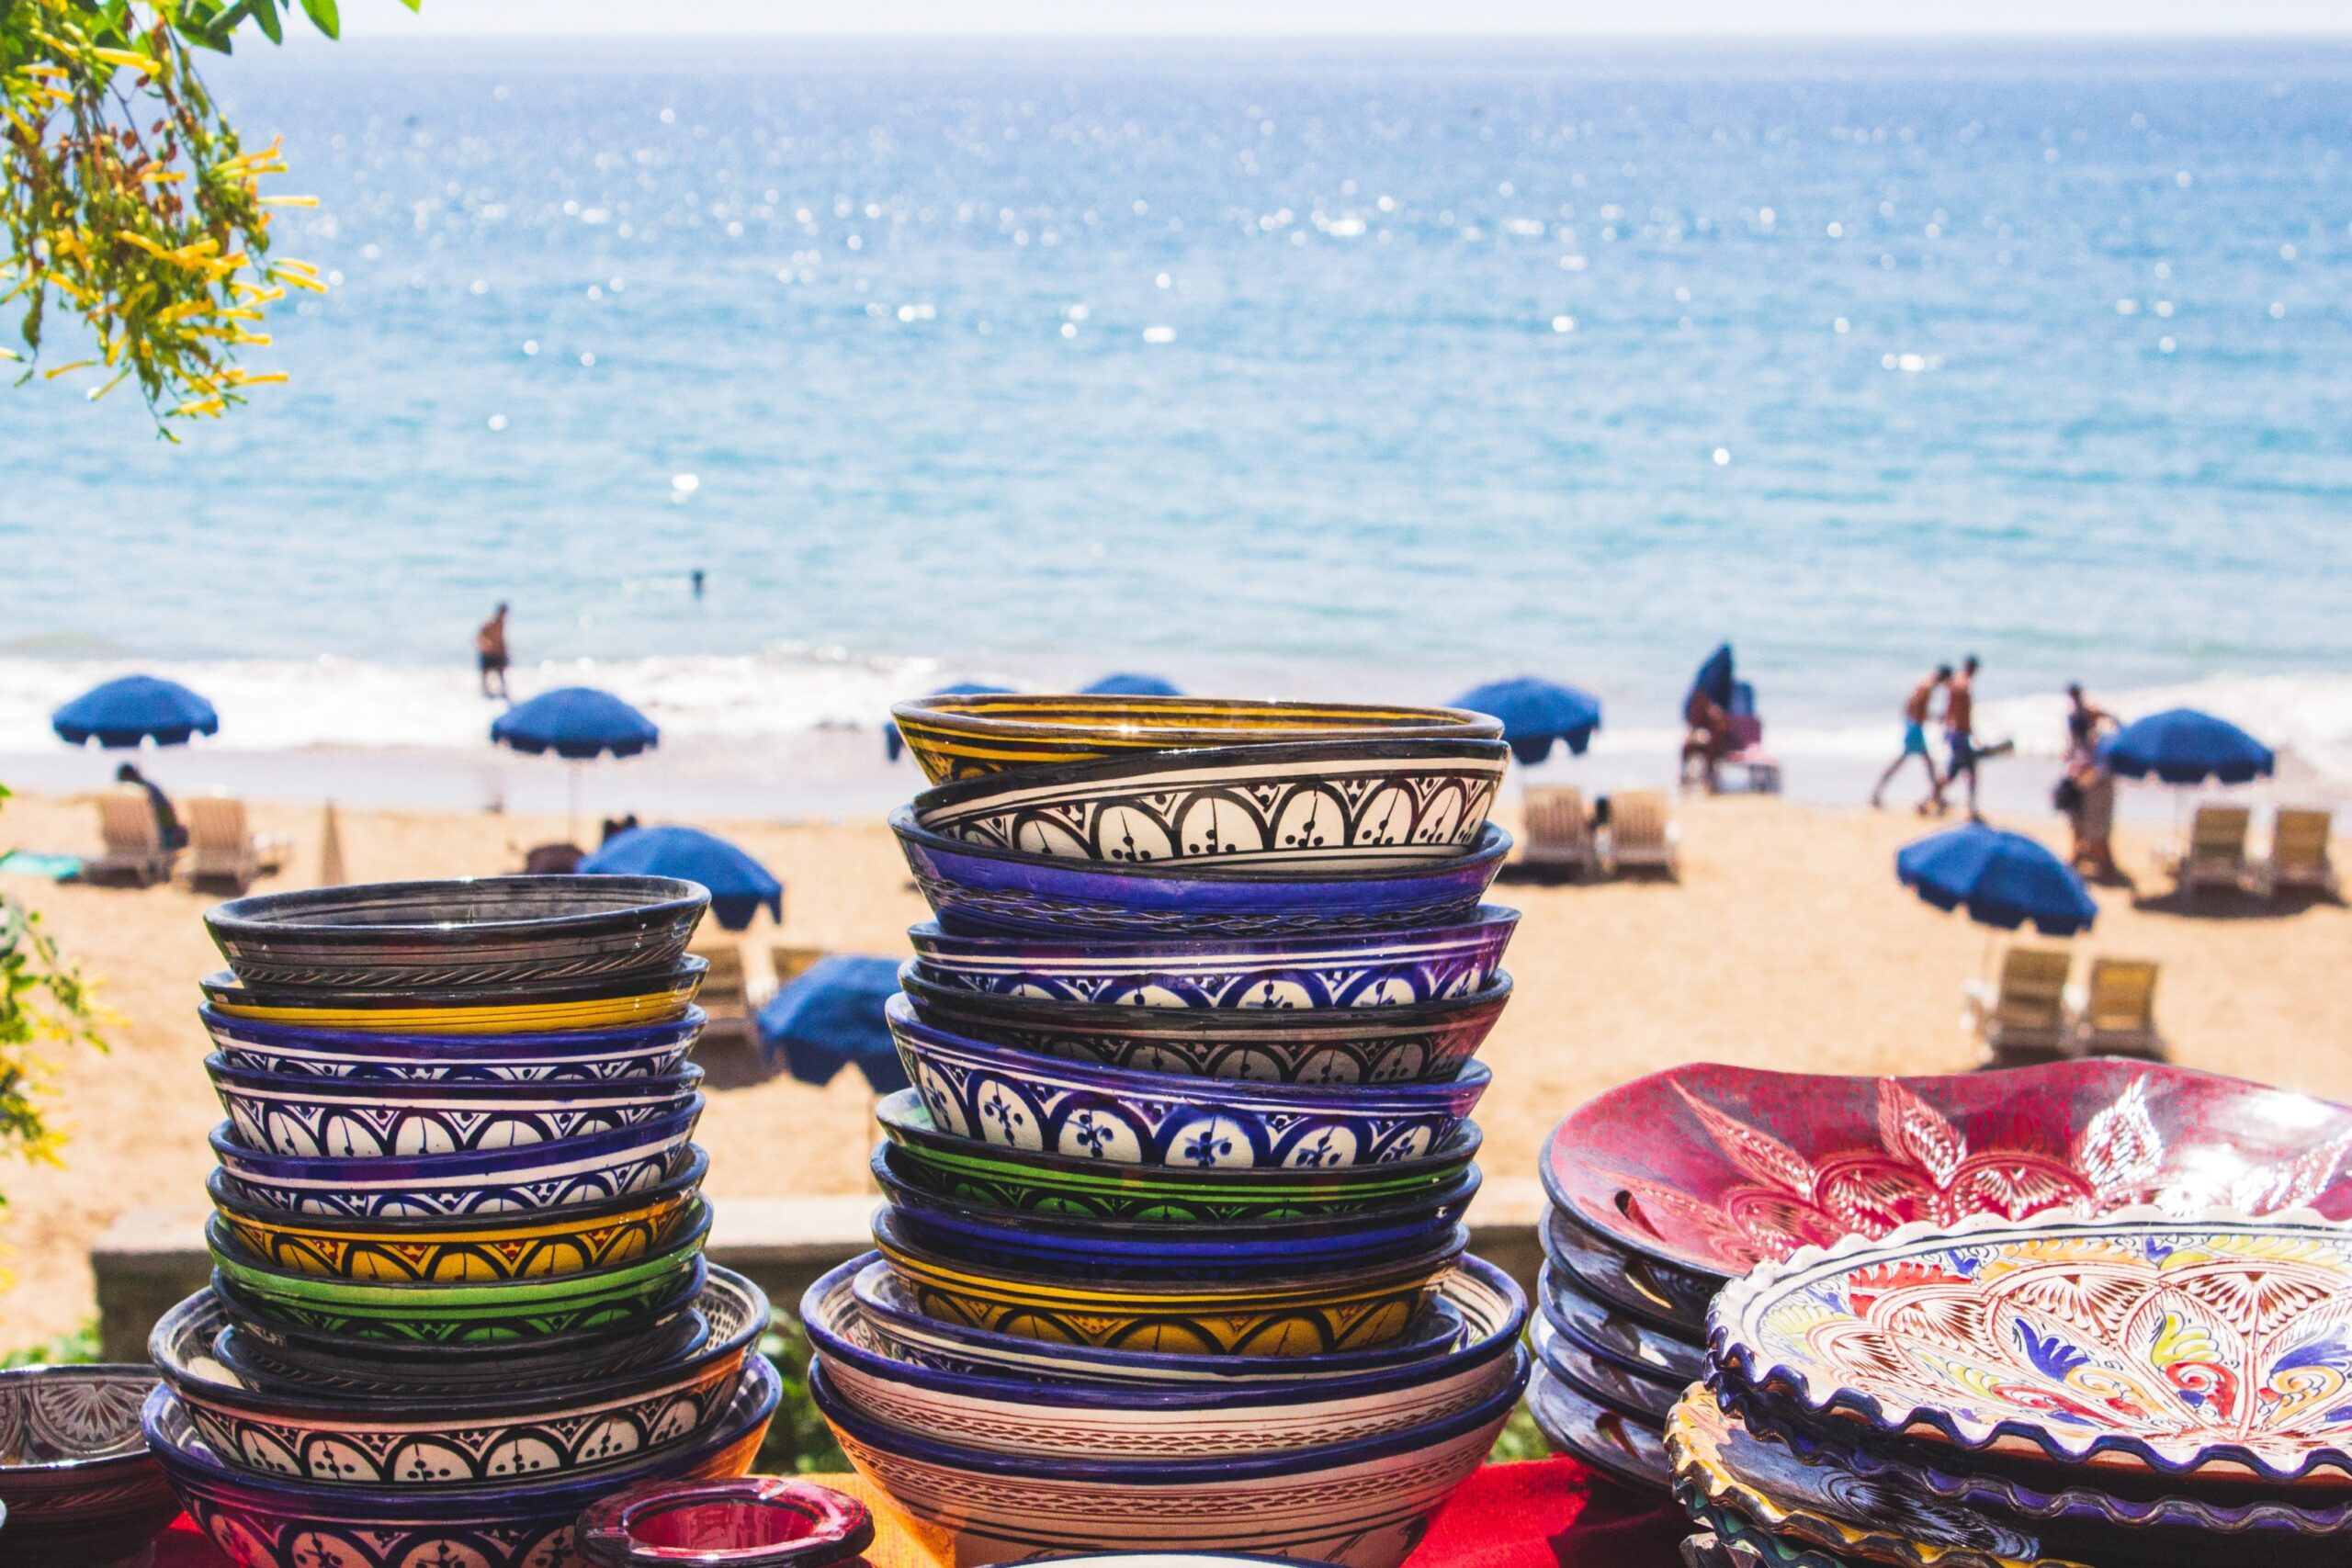 Bowls Stacked in Taghazout, Morocco on the Beach